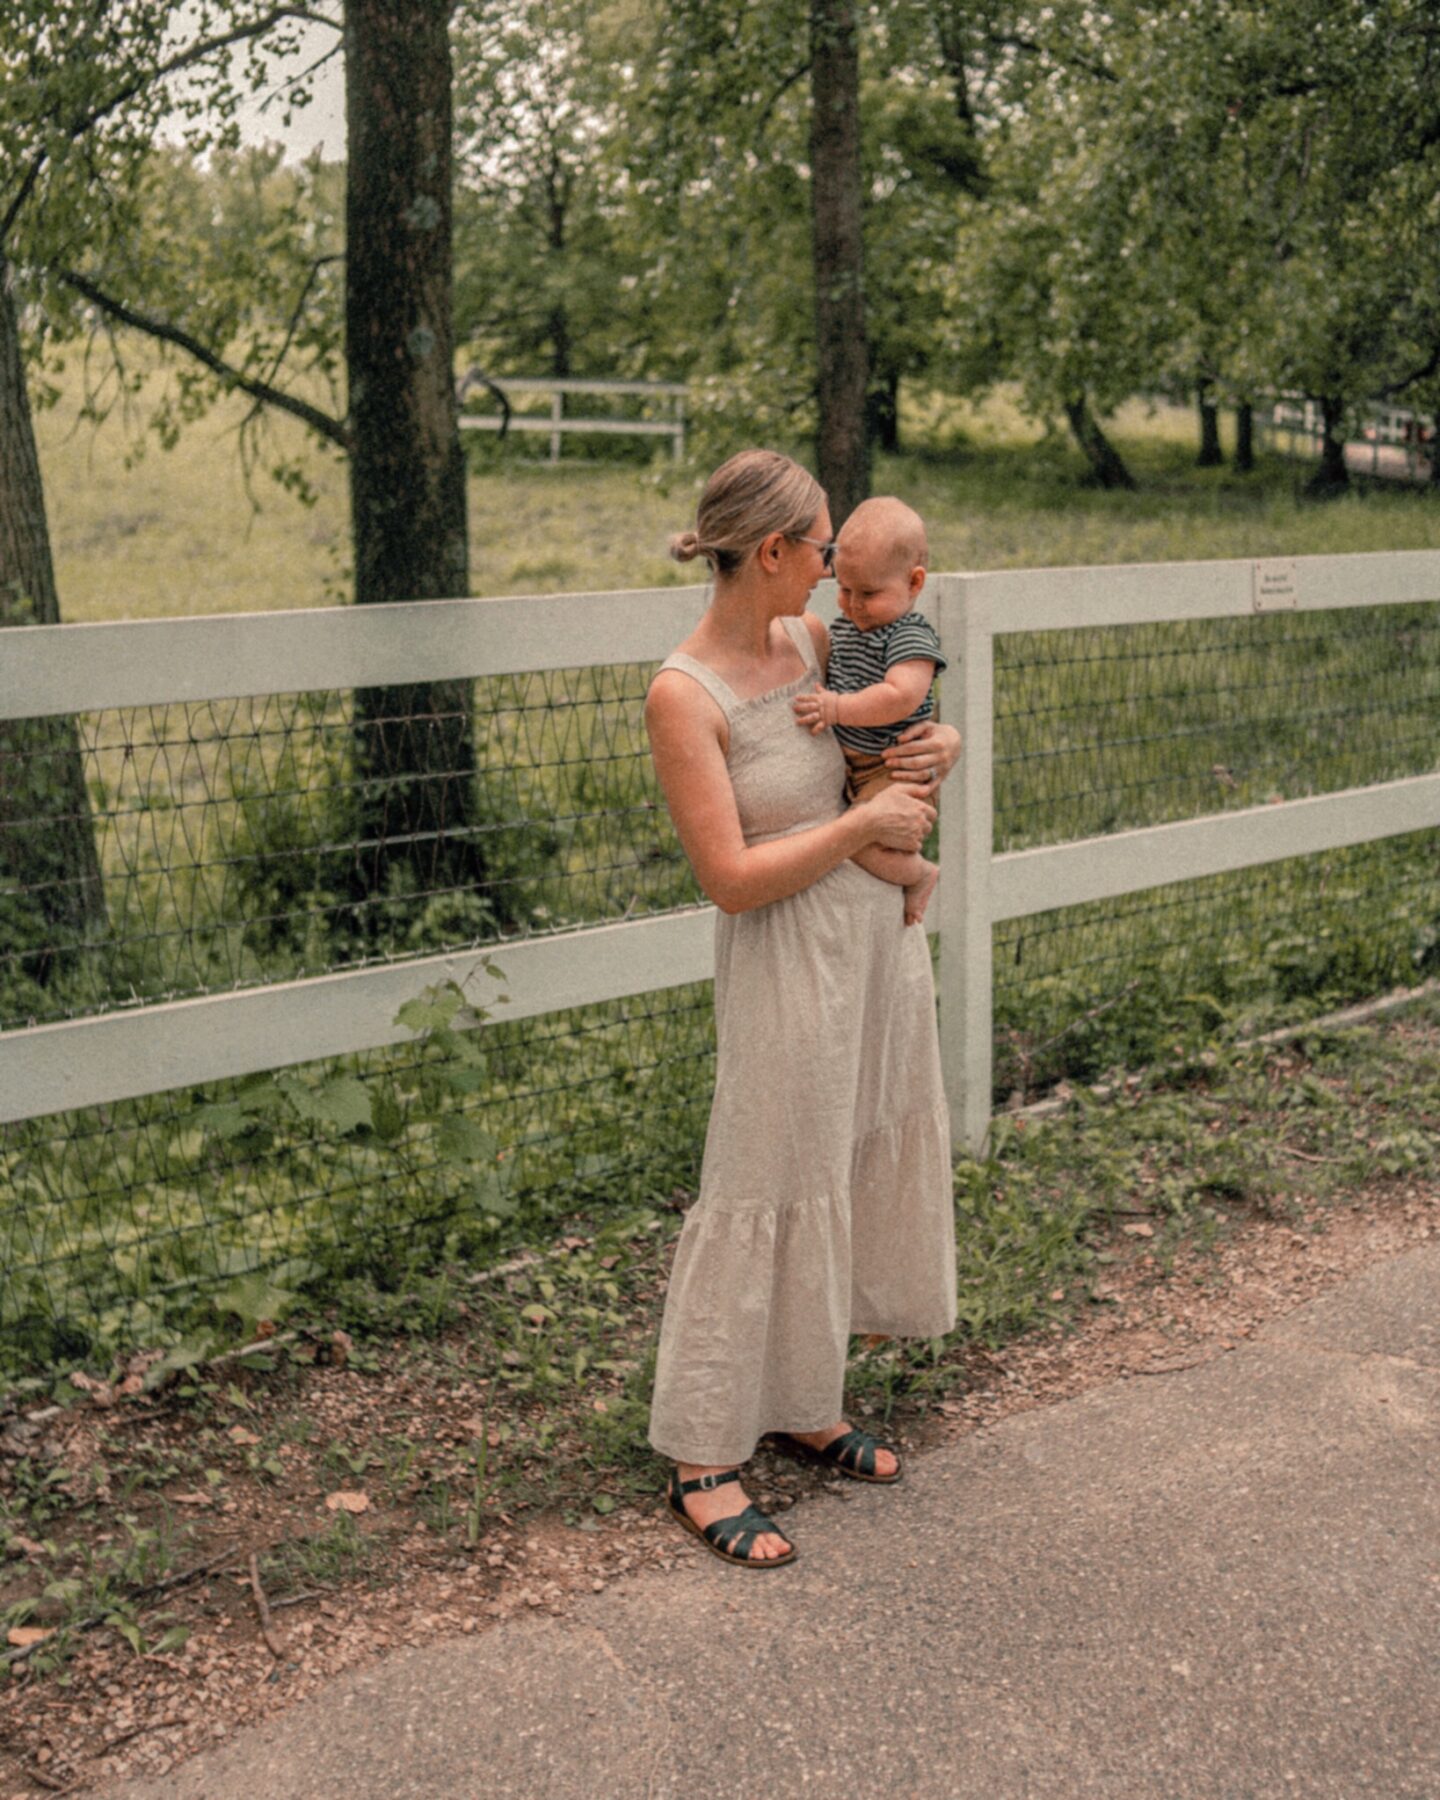 Karin Emily wears her Everlane favorites: a smocked maxi dress in a tiny floral print